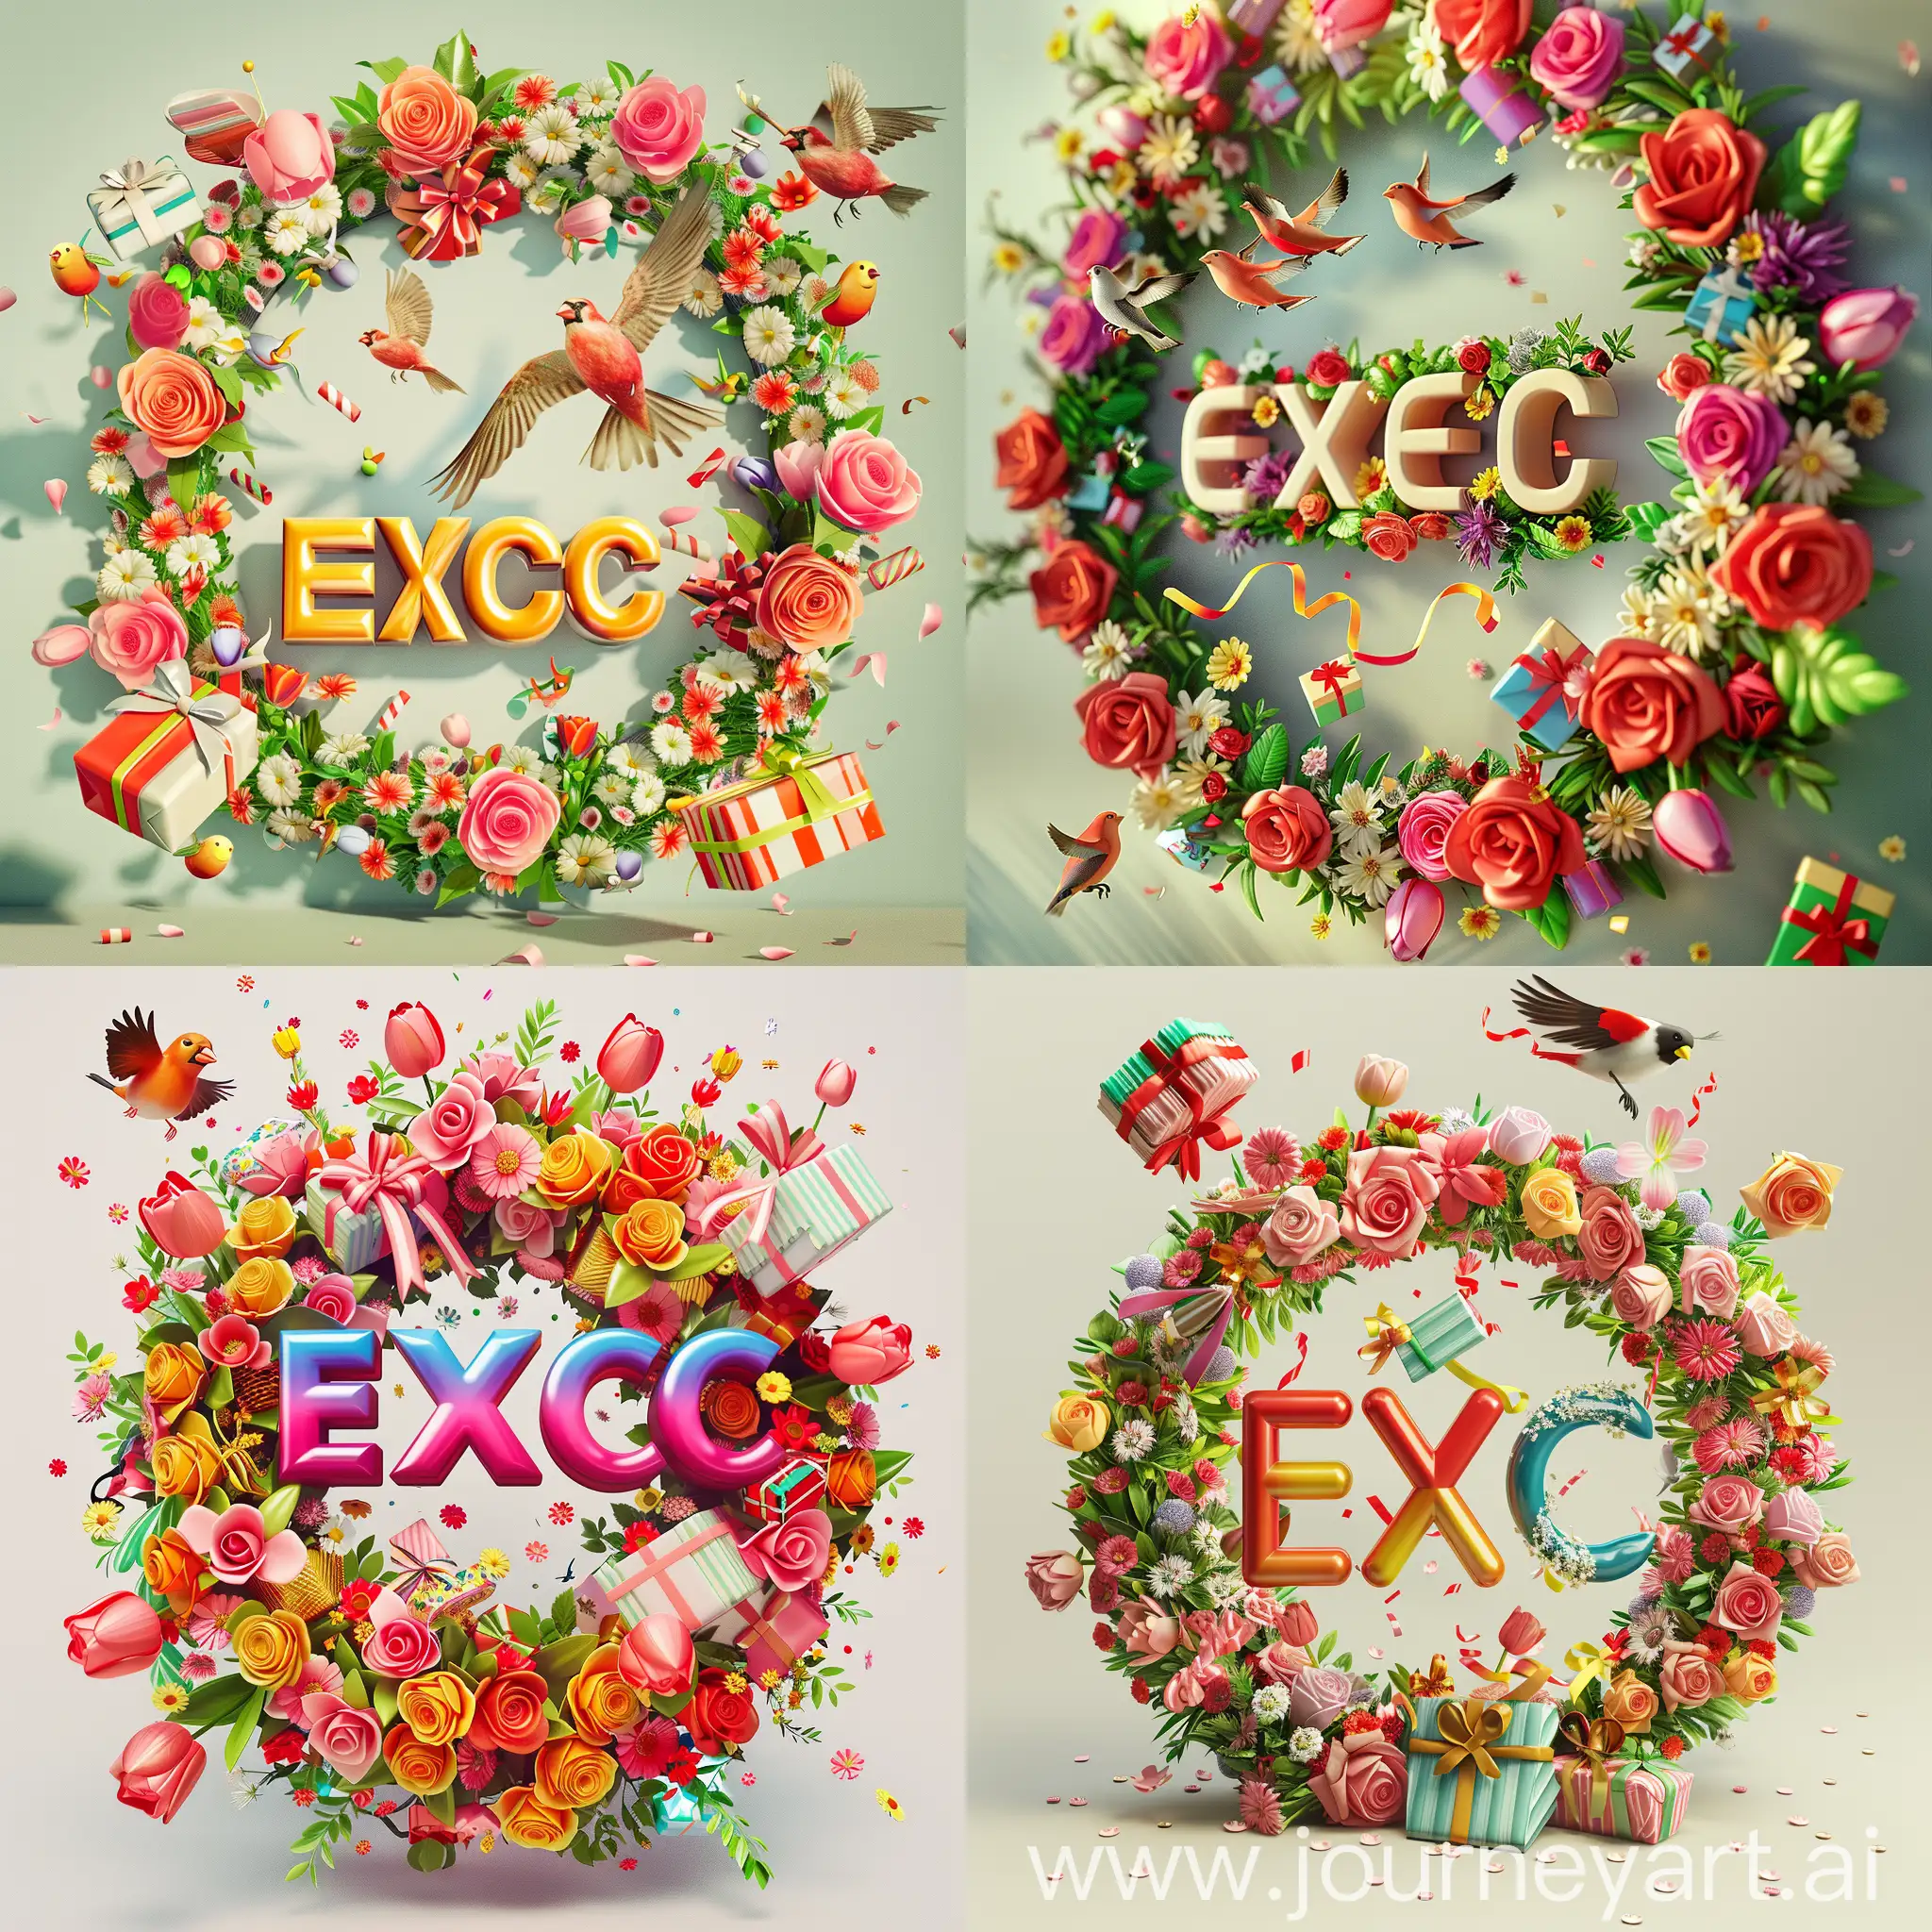 An eye-catching 3D render of the word "EXEC" in a cartoon style. The lettering is arranged in a circular pattern, with lush flowers such as roses, tulips, and daisies surrounding it on all sides. As if in celebration, 3D gifts are falling from above, each one beautifully wrapped with ribbons and bows. In the background, playful bullfinches are flying among the flowers, adding a touch of vibrancy and movement to the scene. The overall effect is a bright, cheerful, and dynamic poster that showcases the art of typography and 3D design., typography, poster, photo, product, 3d render